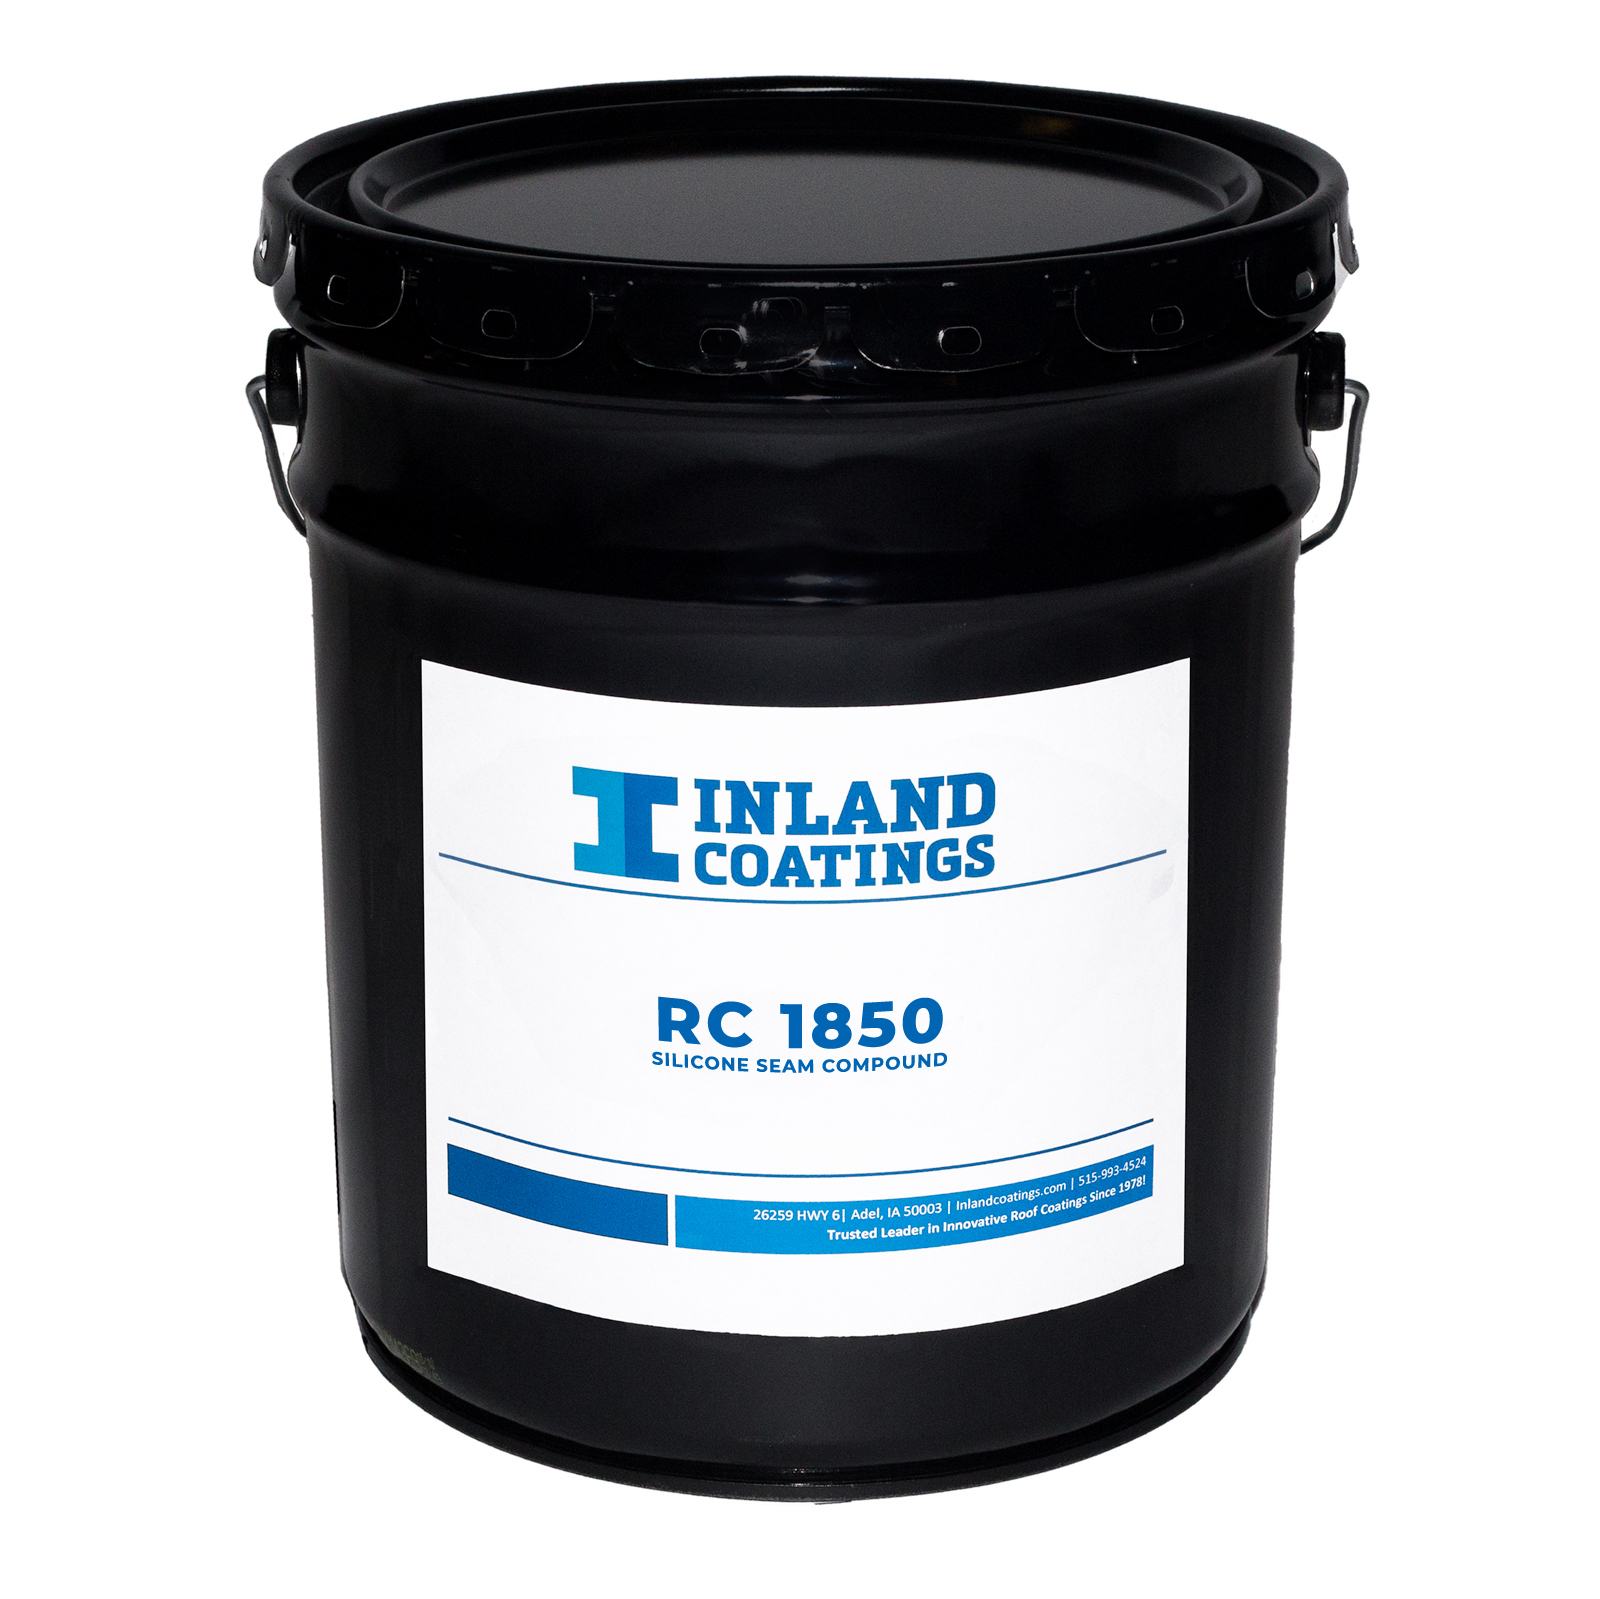 A bucket of Inland's RC-1850 Silicone Seam Compound.